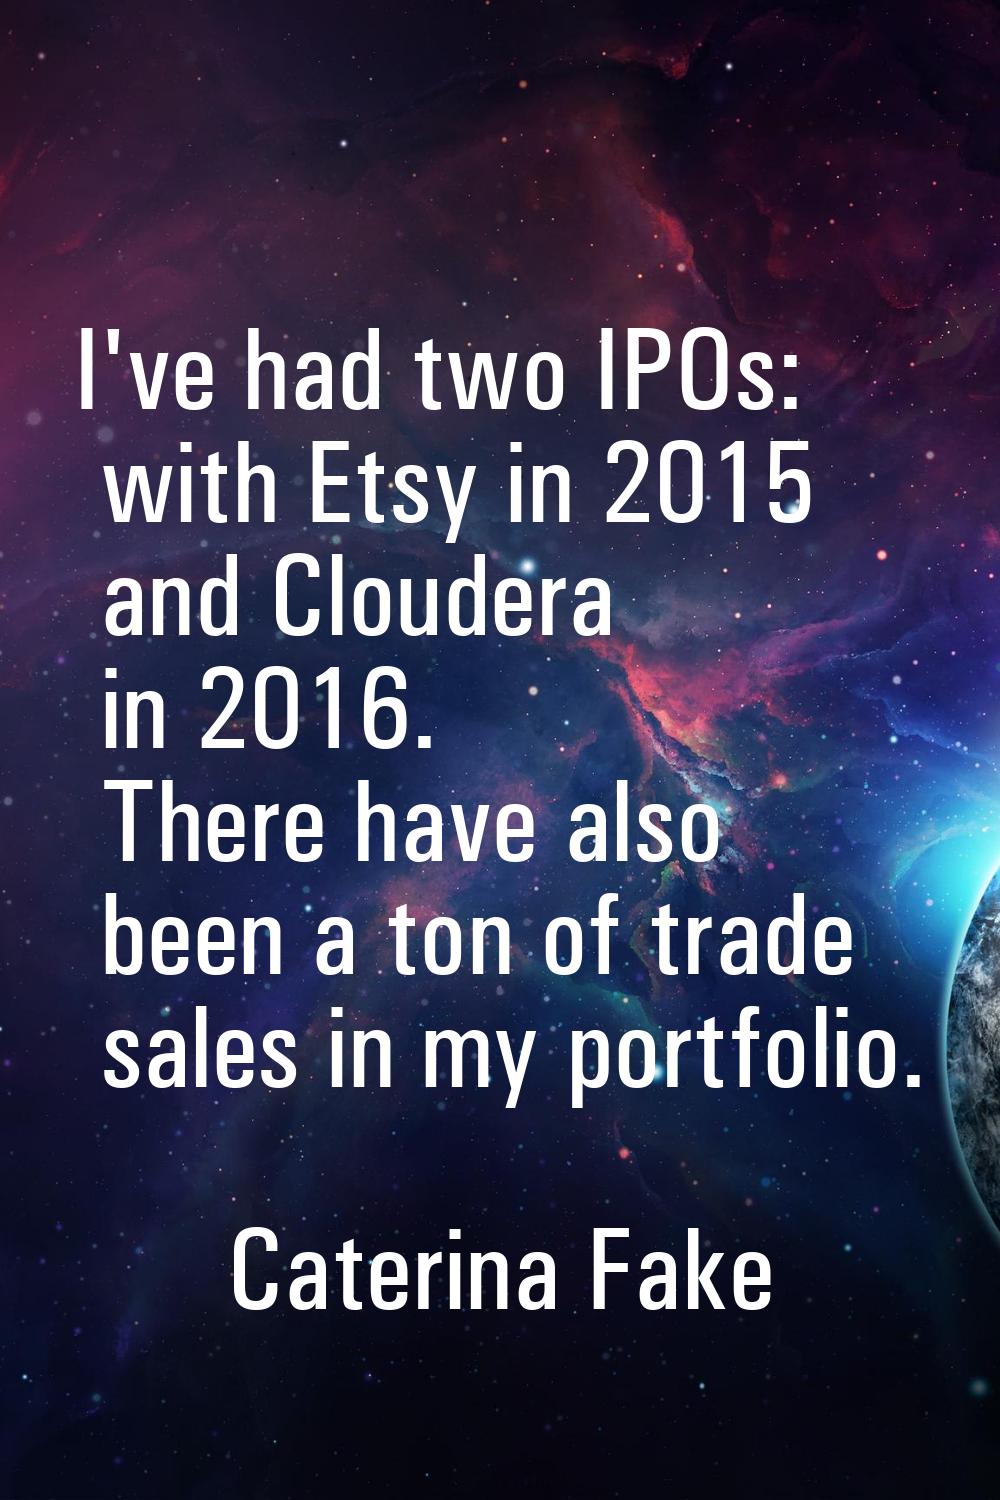 I've had two IPOs: with Etsy in 2015 and Cloudera in 2016. There have also been a ton of trade sale